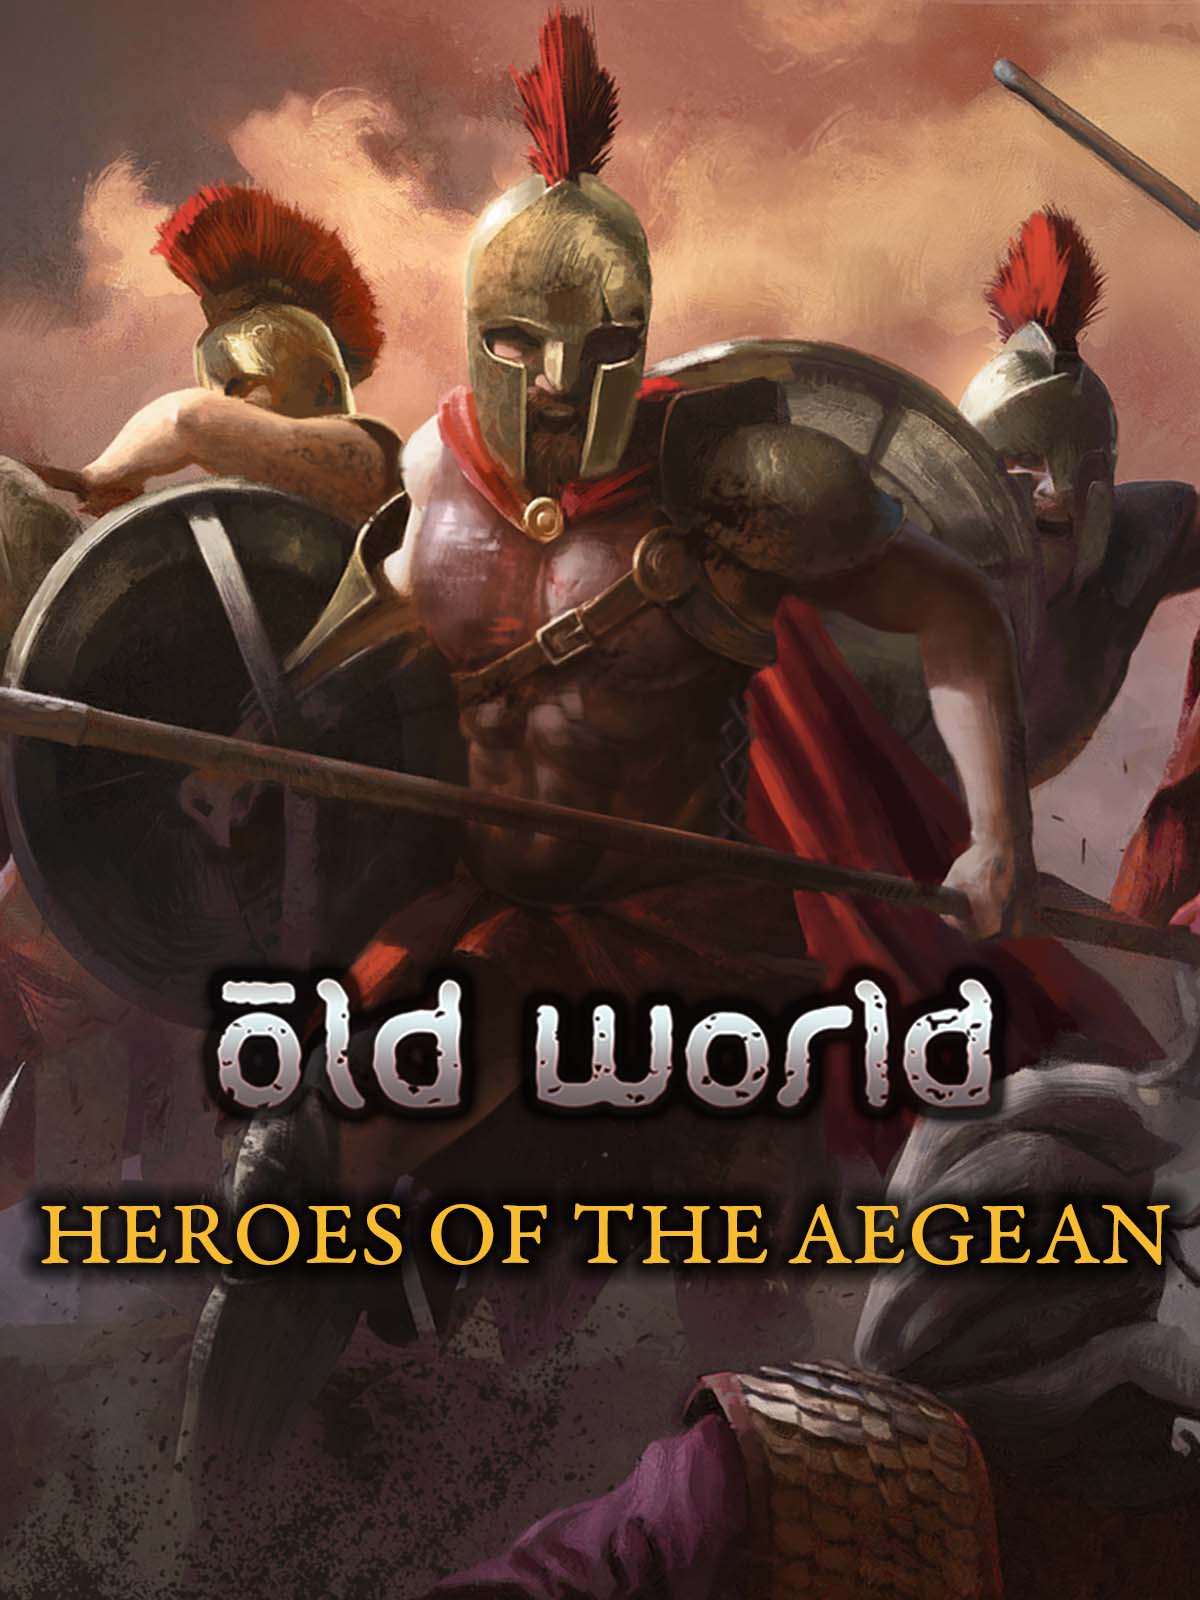 Old World - Heroes of the Aegean